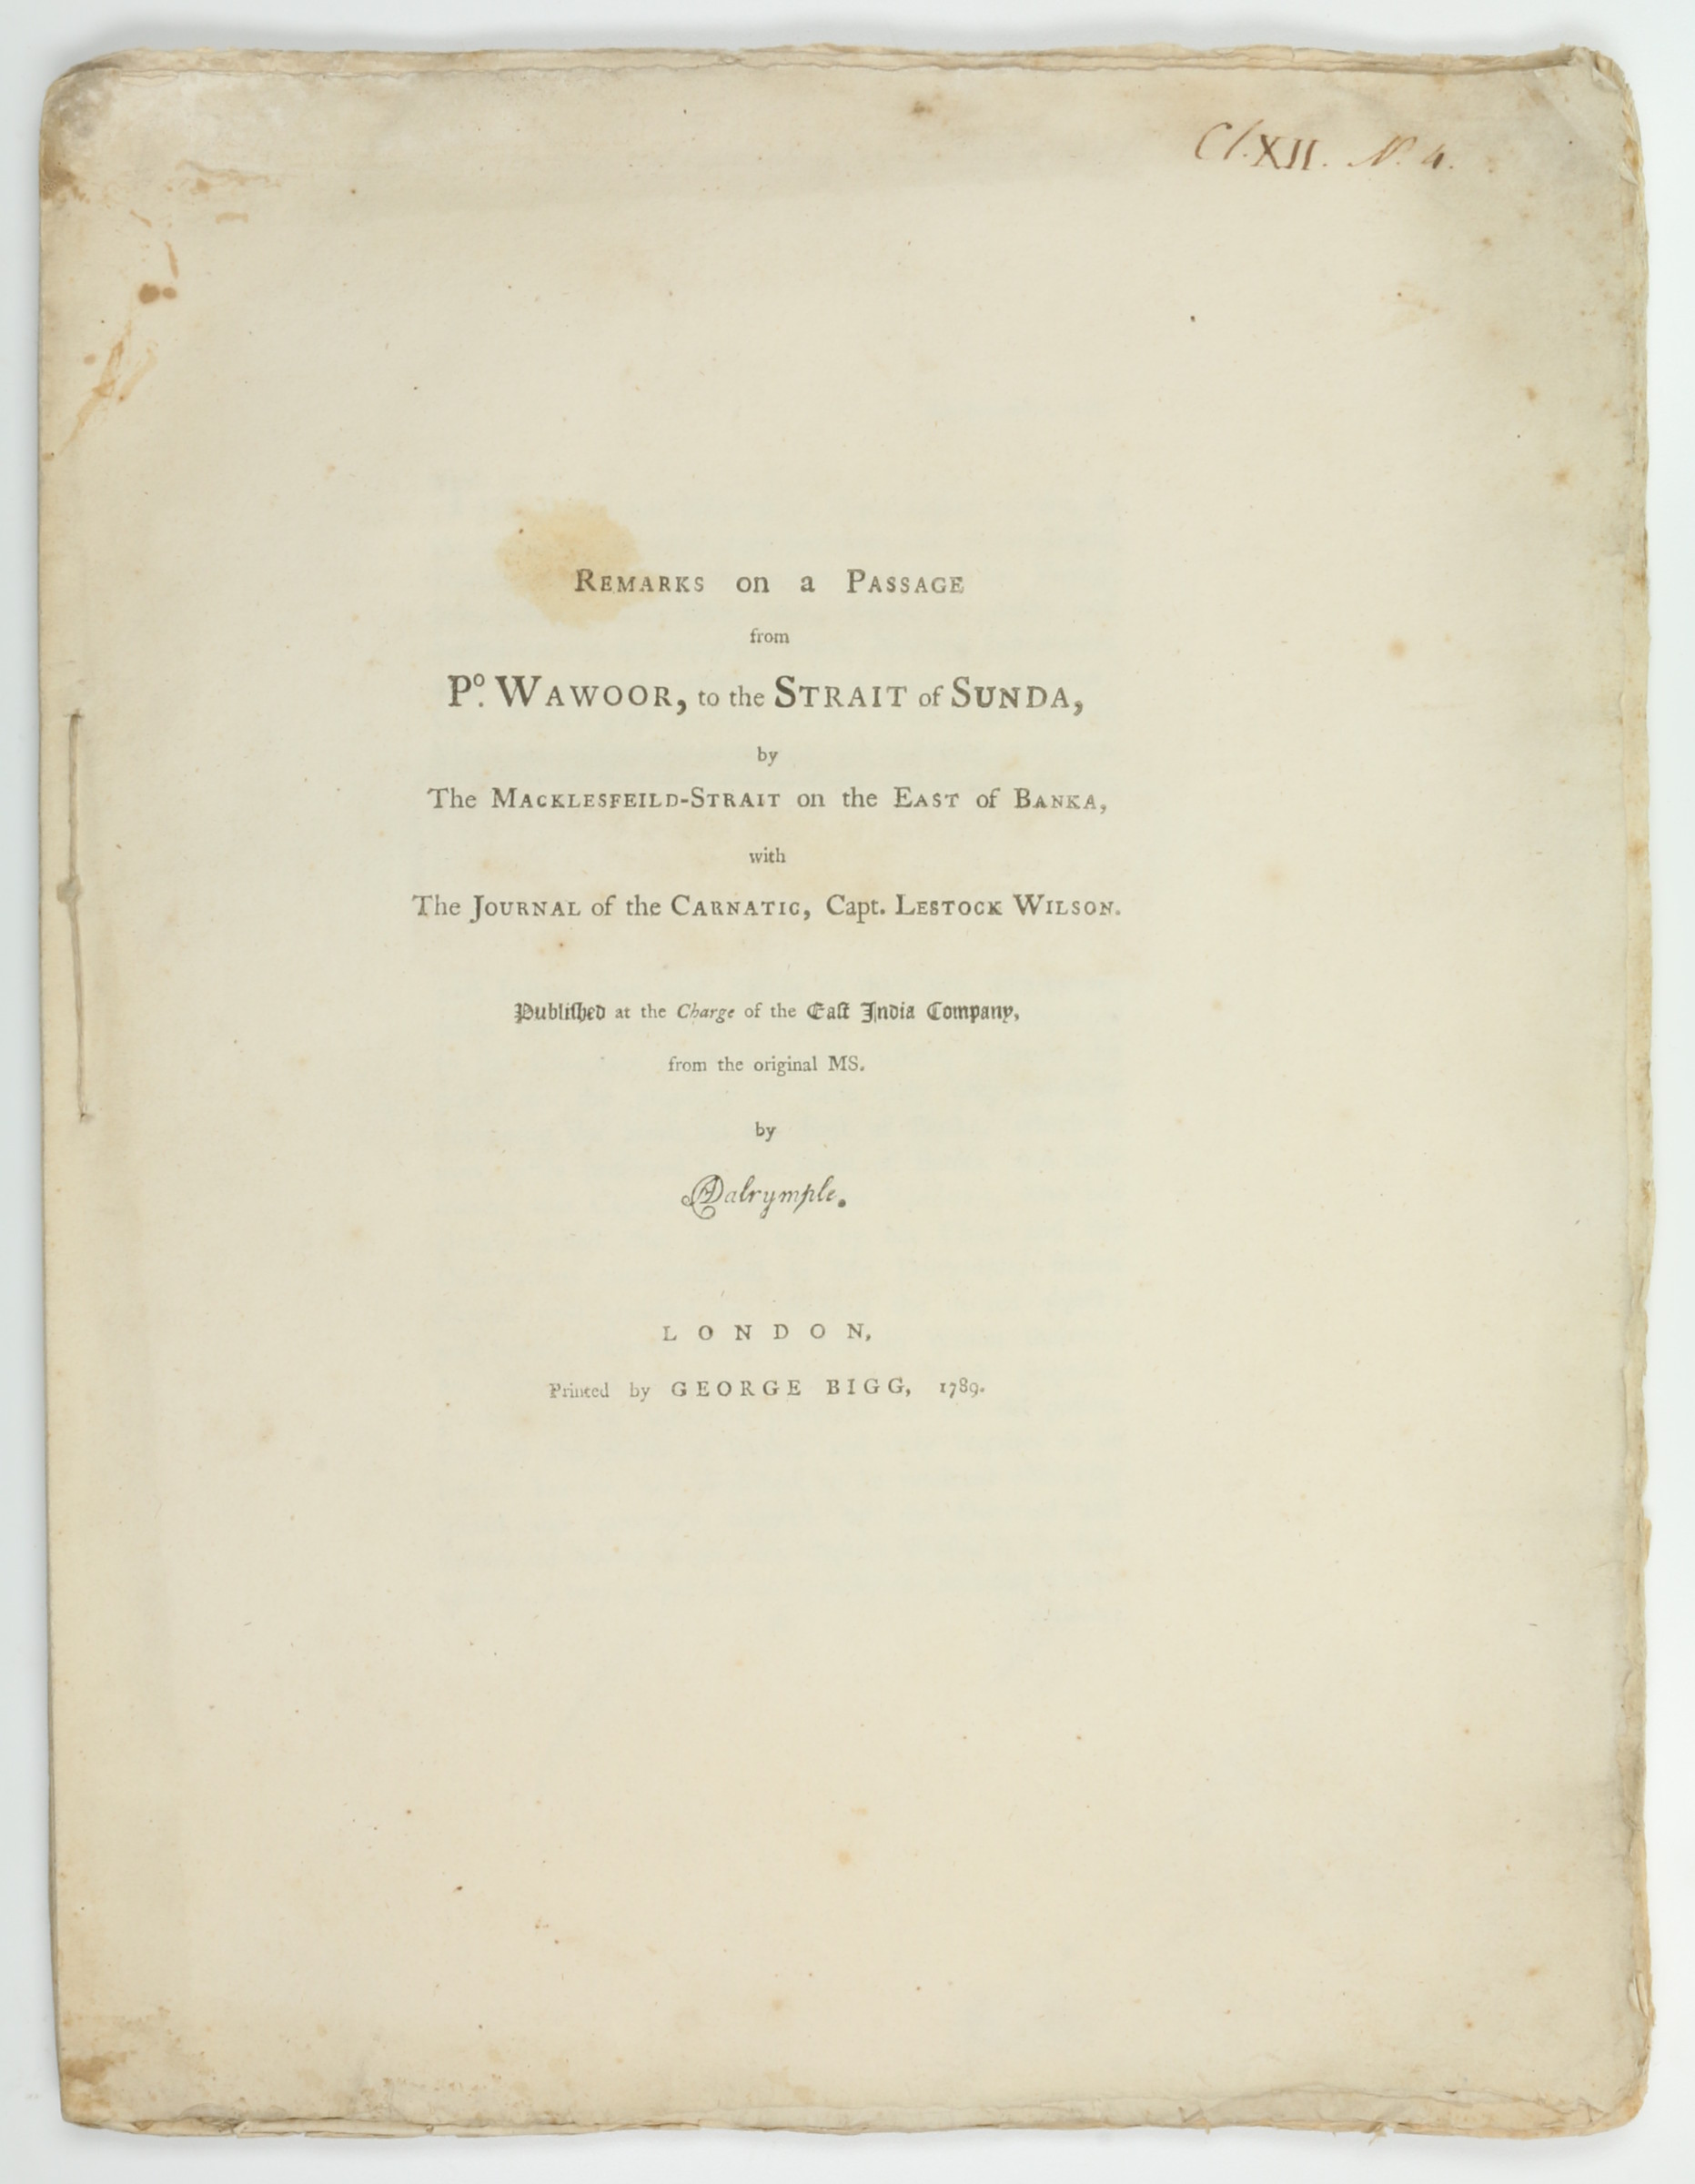 Dalrymple, Alexander. Remarks on a Passage from P. Warwoor, to the ...